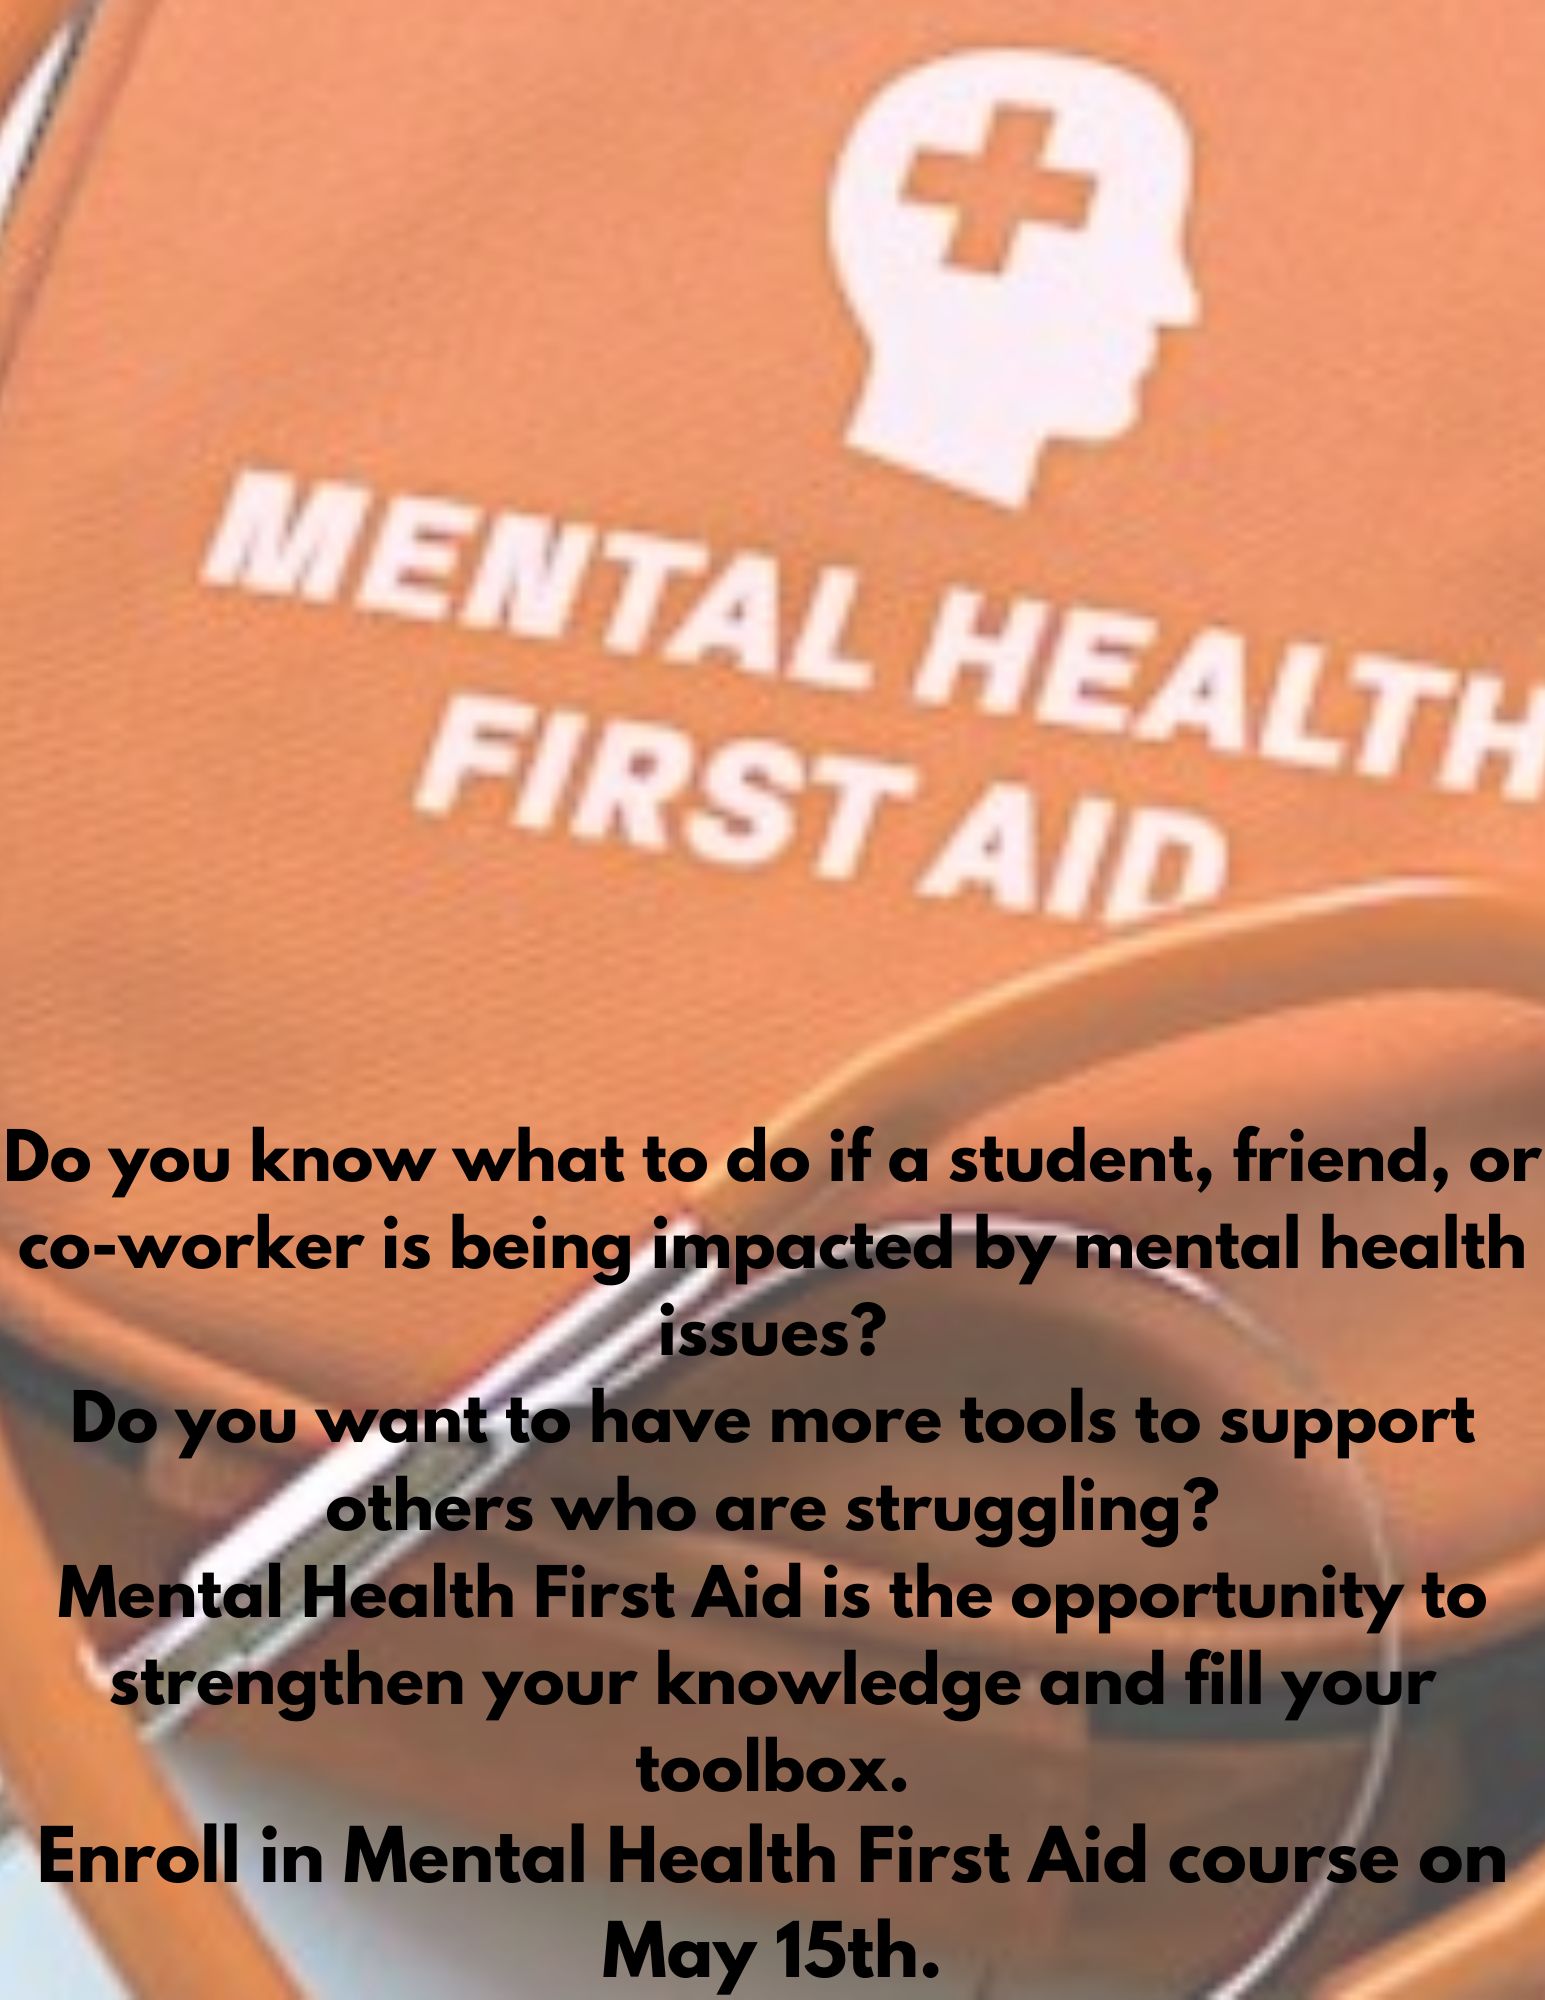 An orange medical bag with a silhouetted head with a cross on it and white lettering underneath reading "Mental Health First Aid" is the backdrop on which is written Do you know what to do if a student, friend or co-worker is being impacted by mental health issues? Do you want to have more tools to support others who are struggling? Mental Health First is the opportunity to strengthen your knowledge and fill your toolbox. Enroll in Mental Health First Aid course on May 15th.